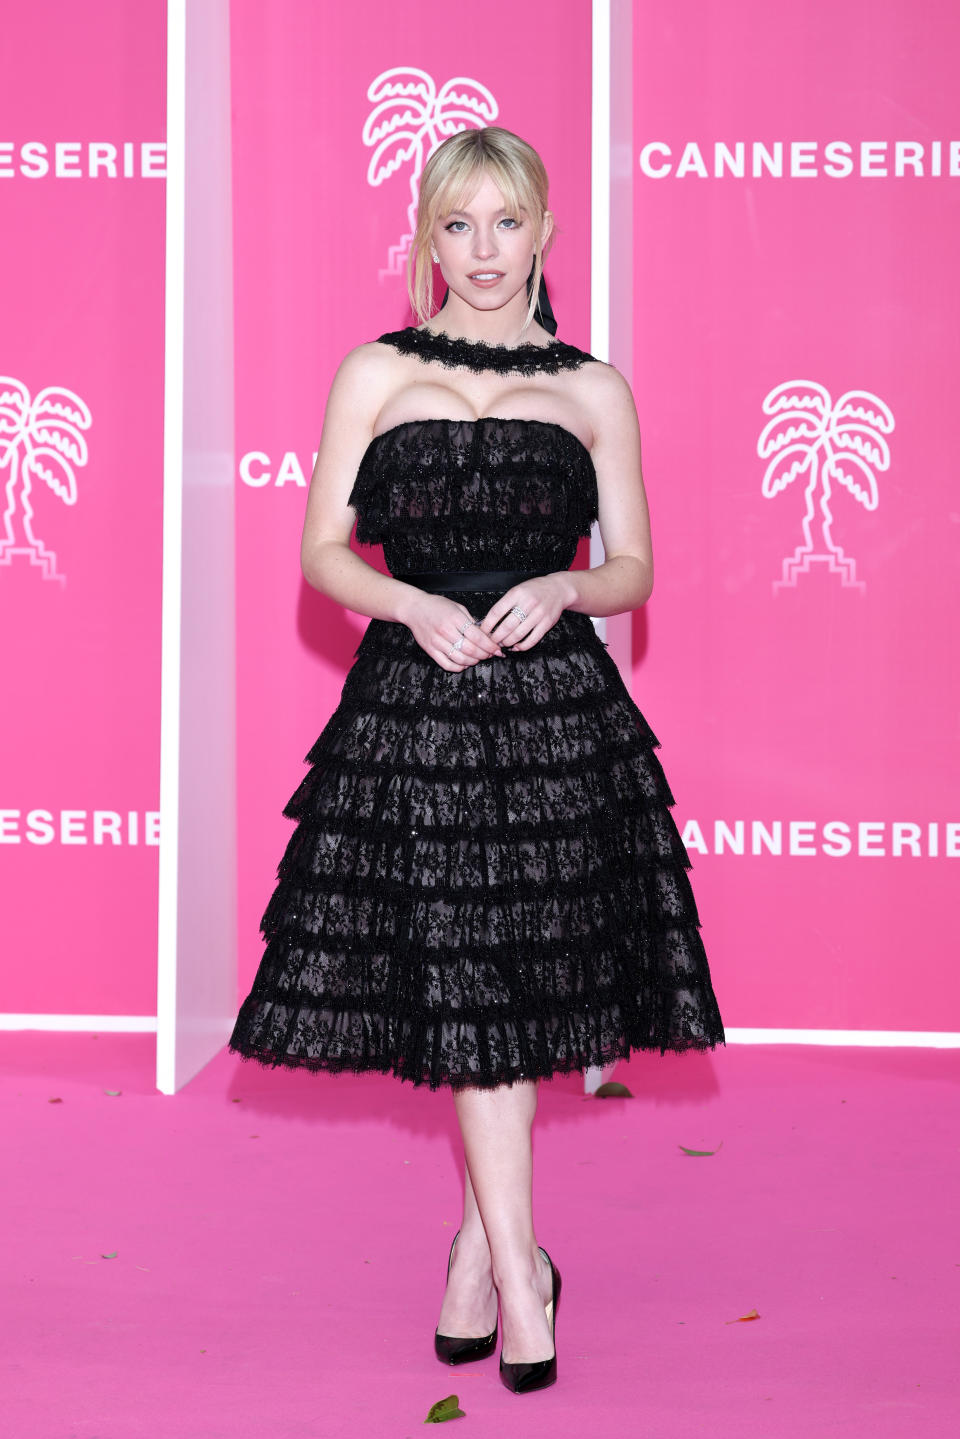 CANNES, FRANCE - APRIL 01:  Sydney Sweeney attends the pink carpet during the 5th Canneseries Festival - Day One on April 01, 2022 in Cannes, France. (Photo by Arnold Jerocki/WireImage)